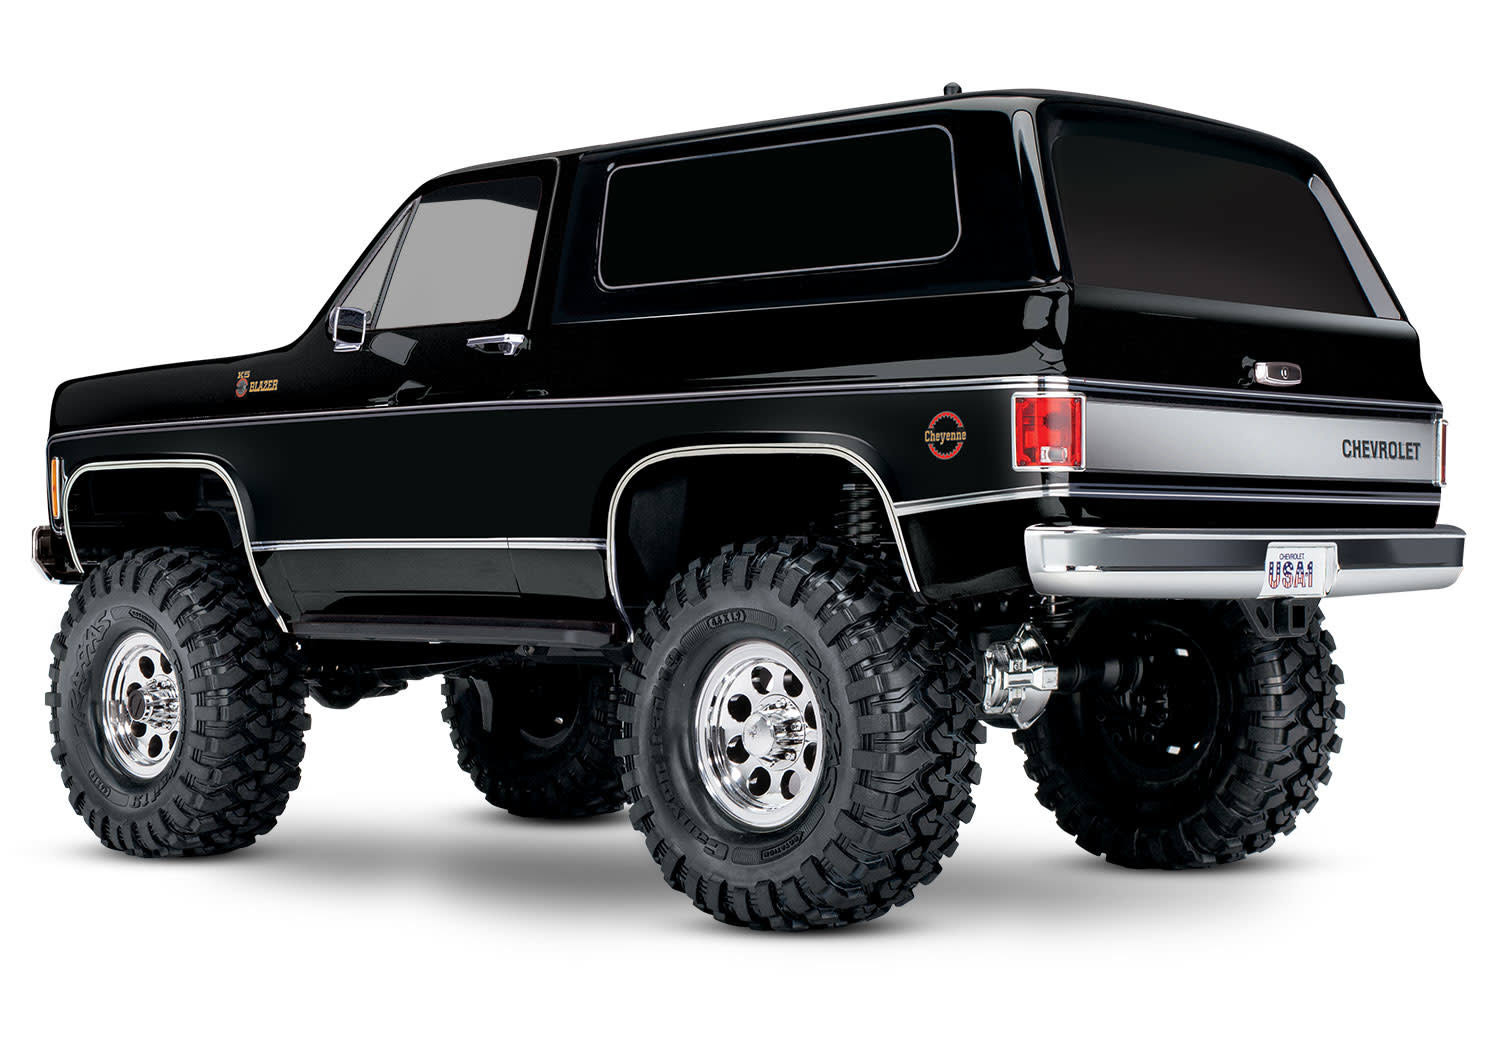 TRAXXAS TRA 82076-4-BLK TRX-4 Scale and Trail Crawler with 1979 Chevrolet Blazer Body: 1/10 Scale 4WD Electric Truck. Ready-to-Drive with TQi Traxxas